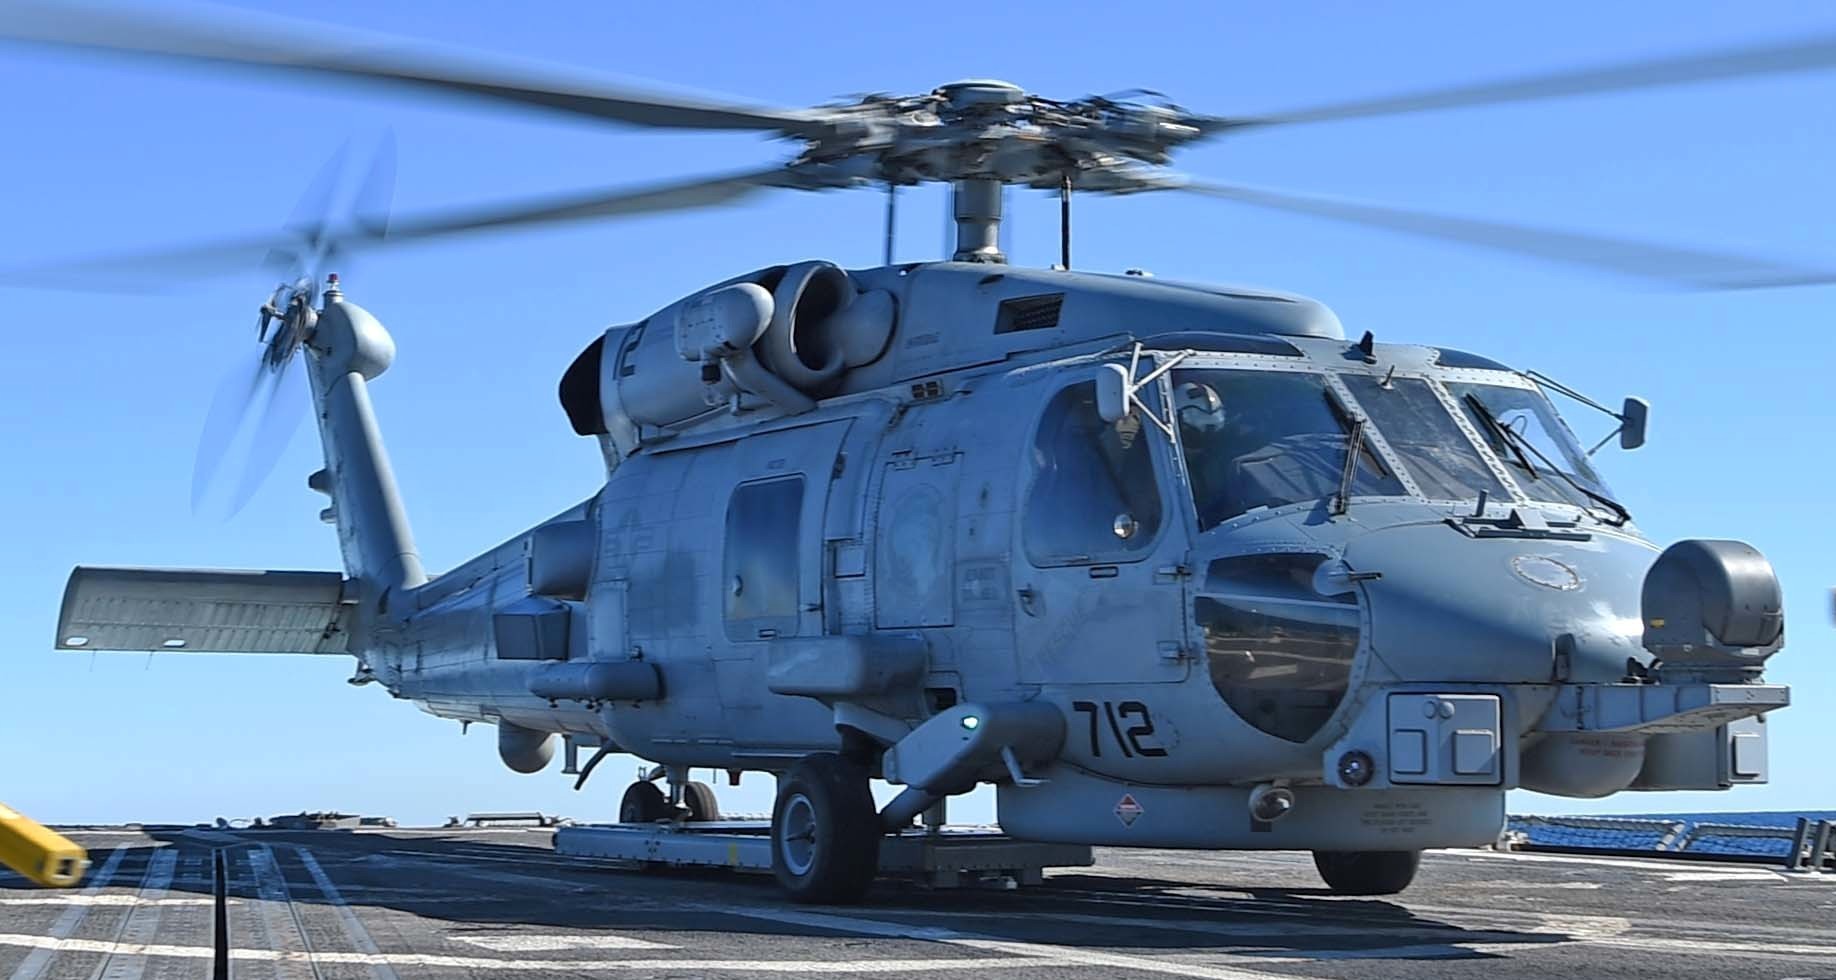 hsm-71 raptors helicopter maritime strike squadron mh-60r seahawk navy 2015 08